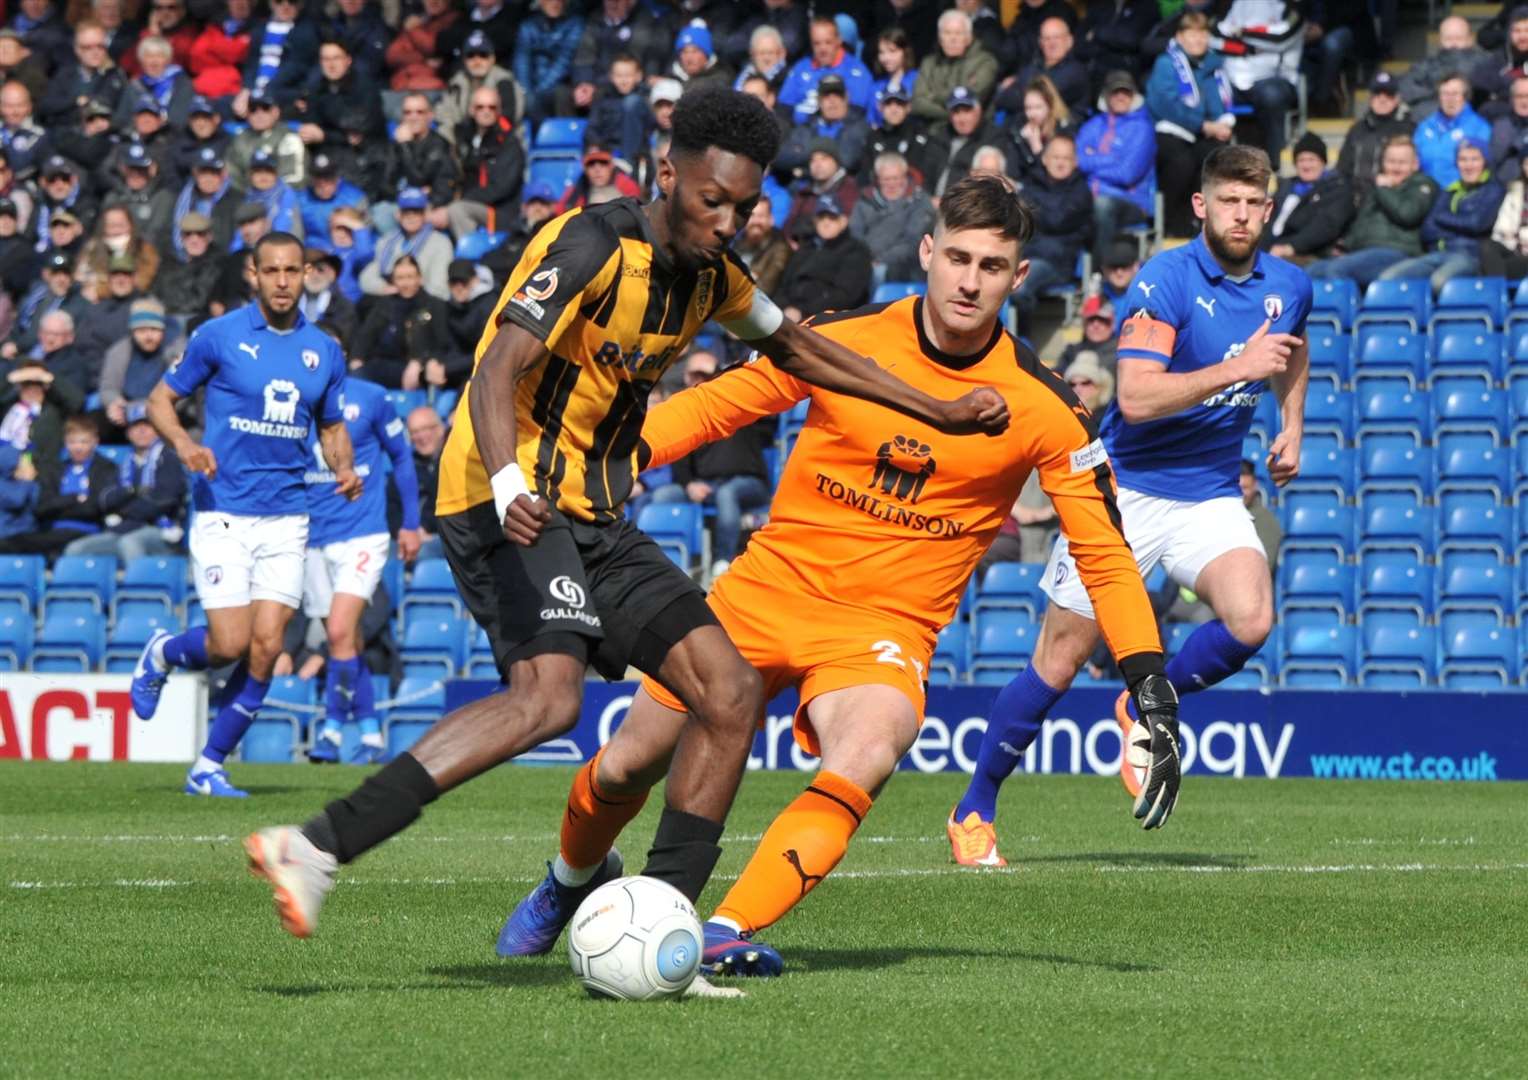 Blair Turgott scores for Maidstone at Chesterfield - his first league goal after the knee injury Picture: Steve Terrell